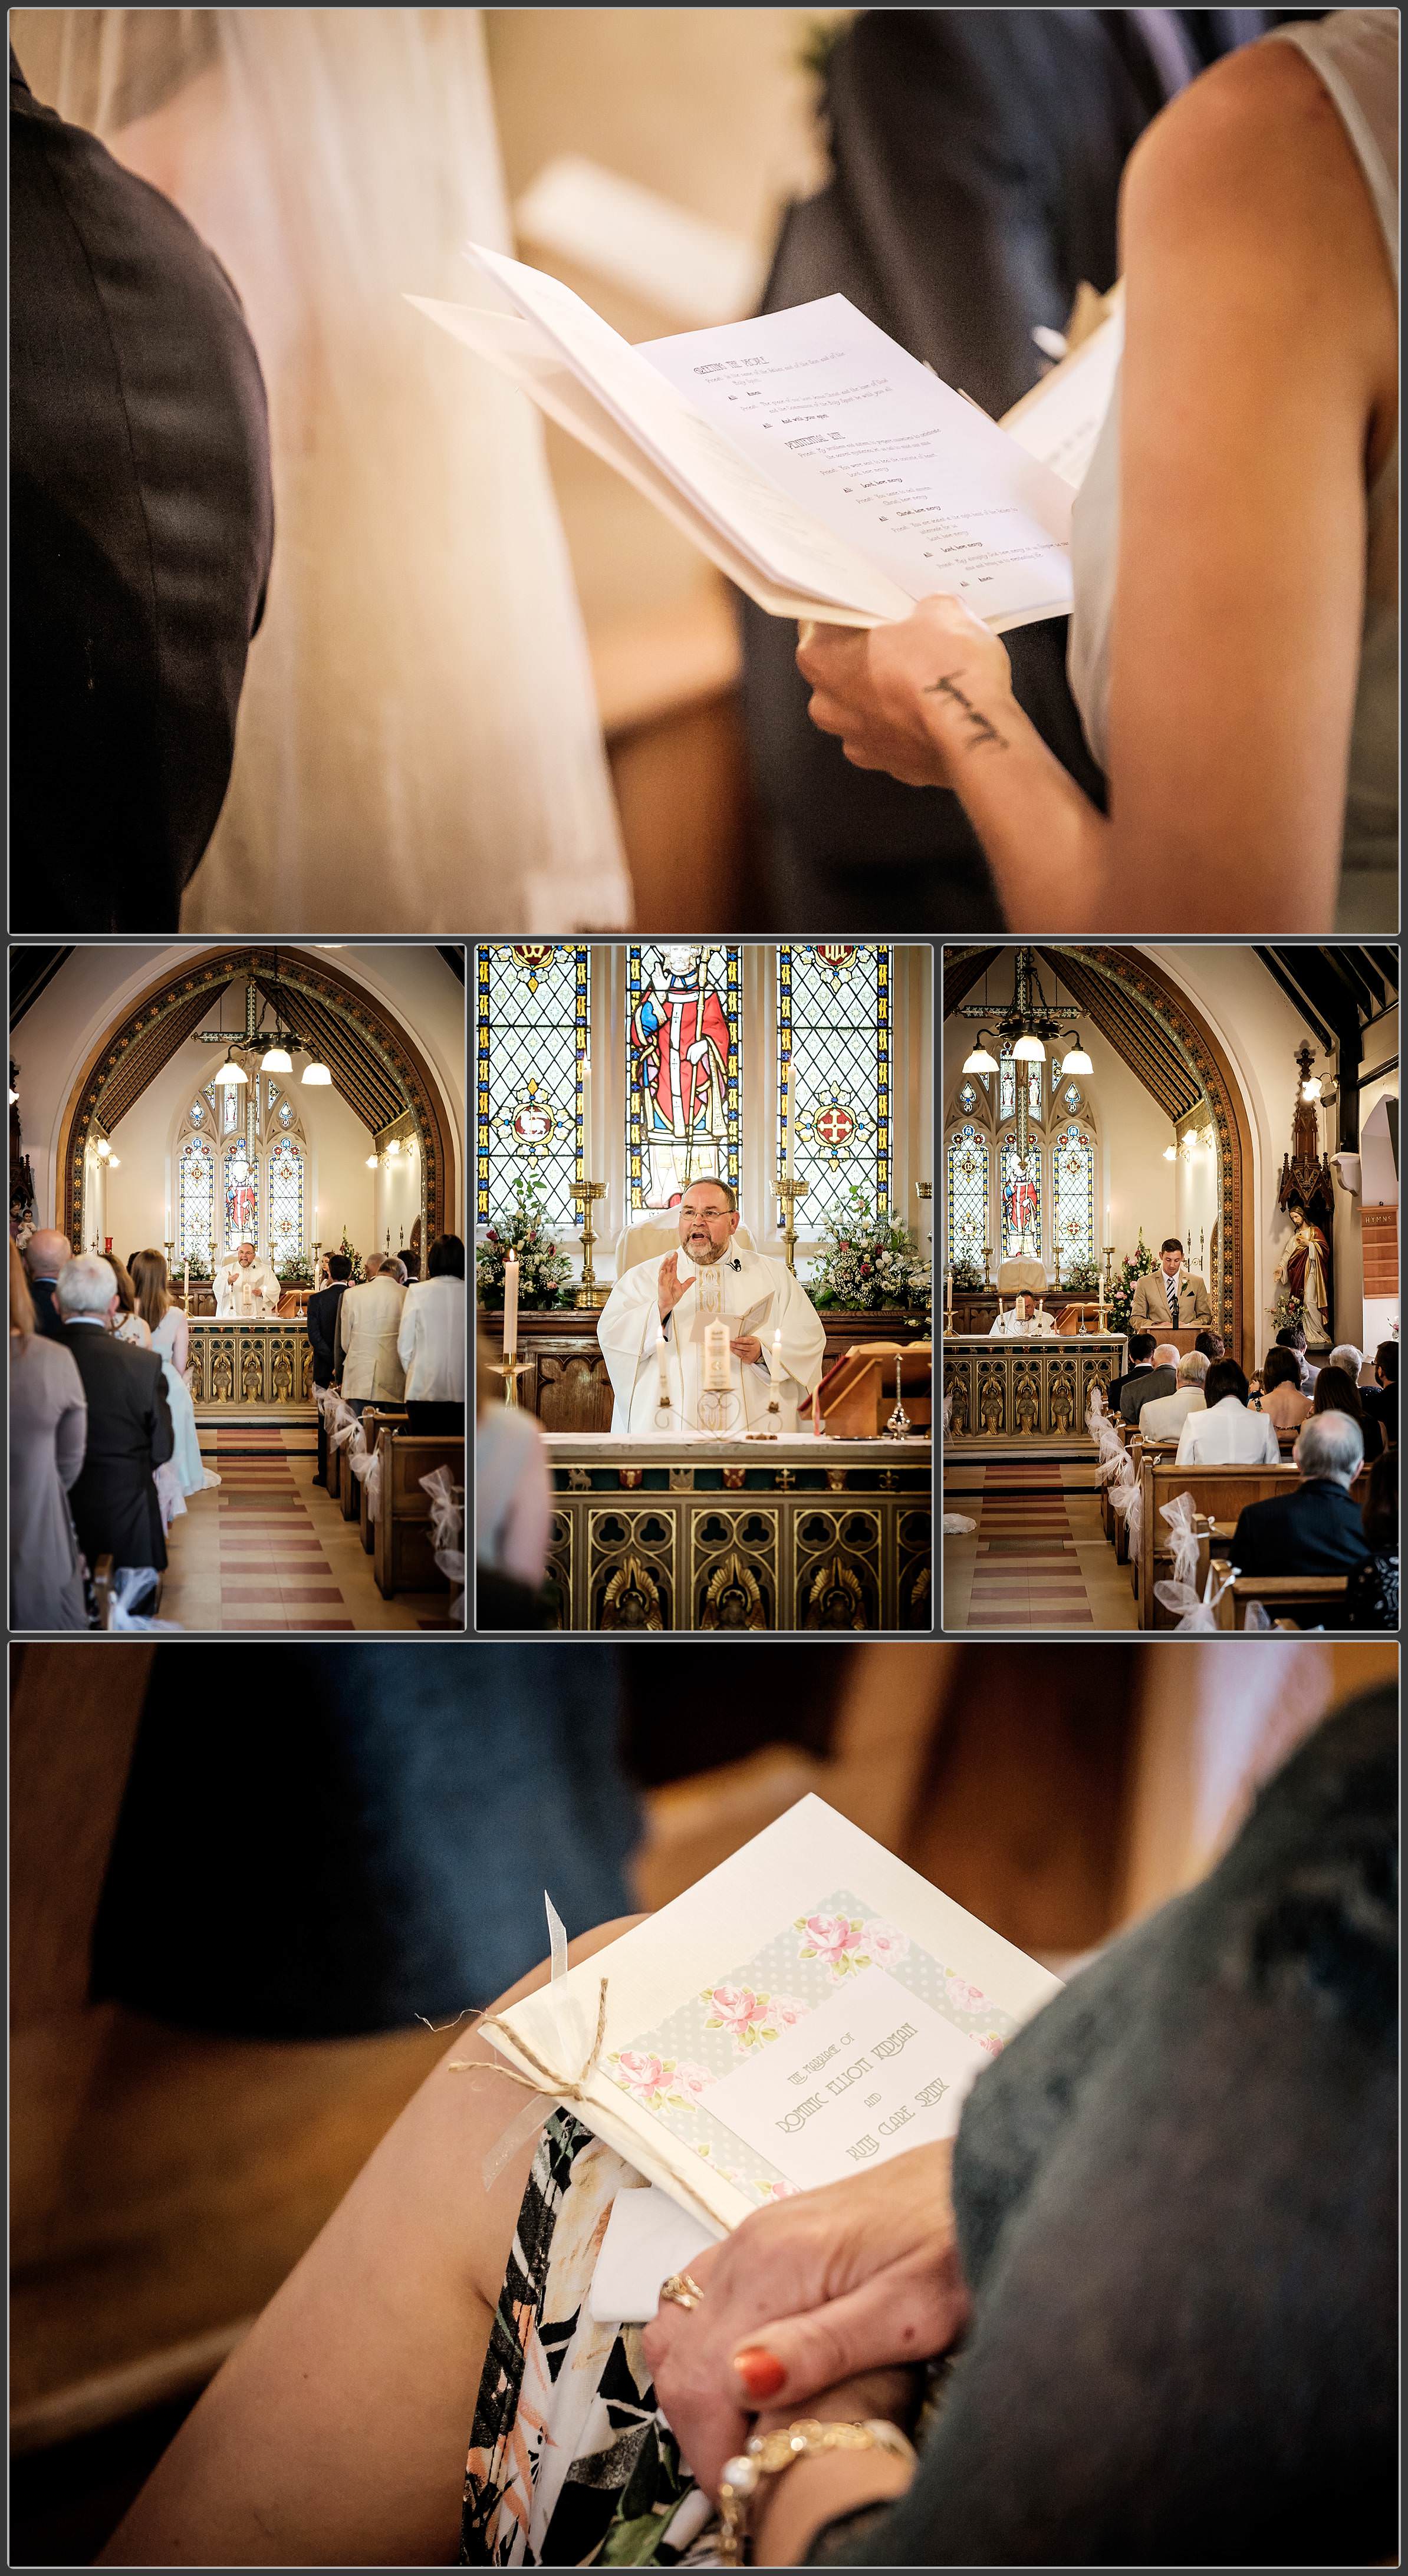 Wedding photography at St Augustine's Church